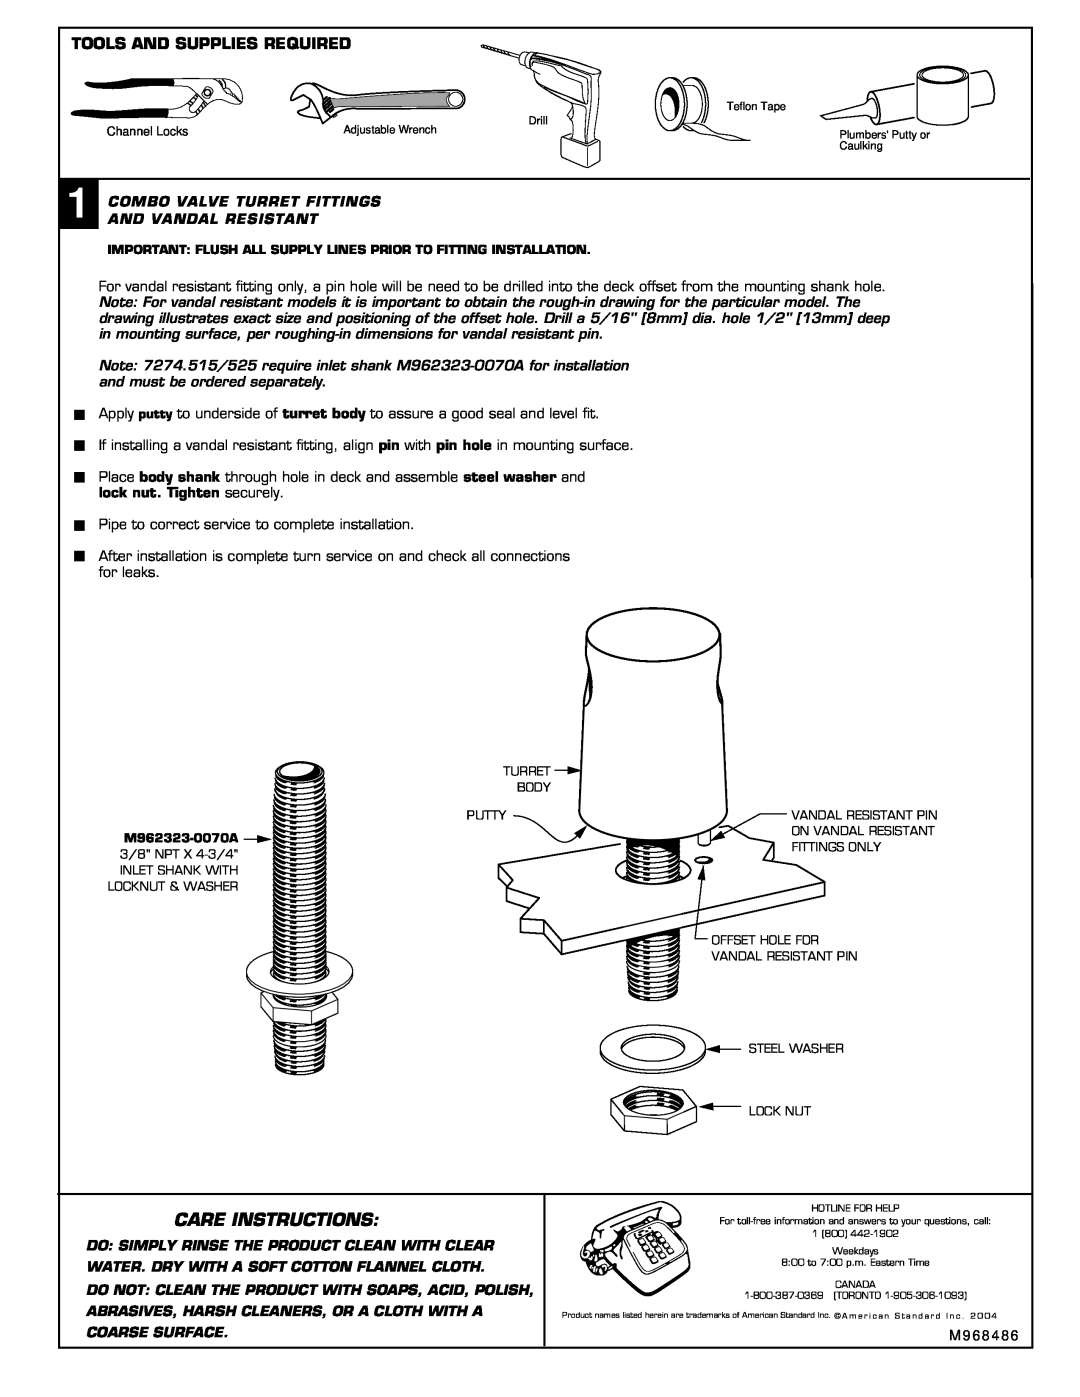 American Standard 7274.521VR, 7274.525, 7274.515 installation instructions Tools And Supplies Required, Care Instructions 